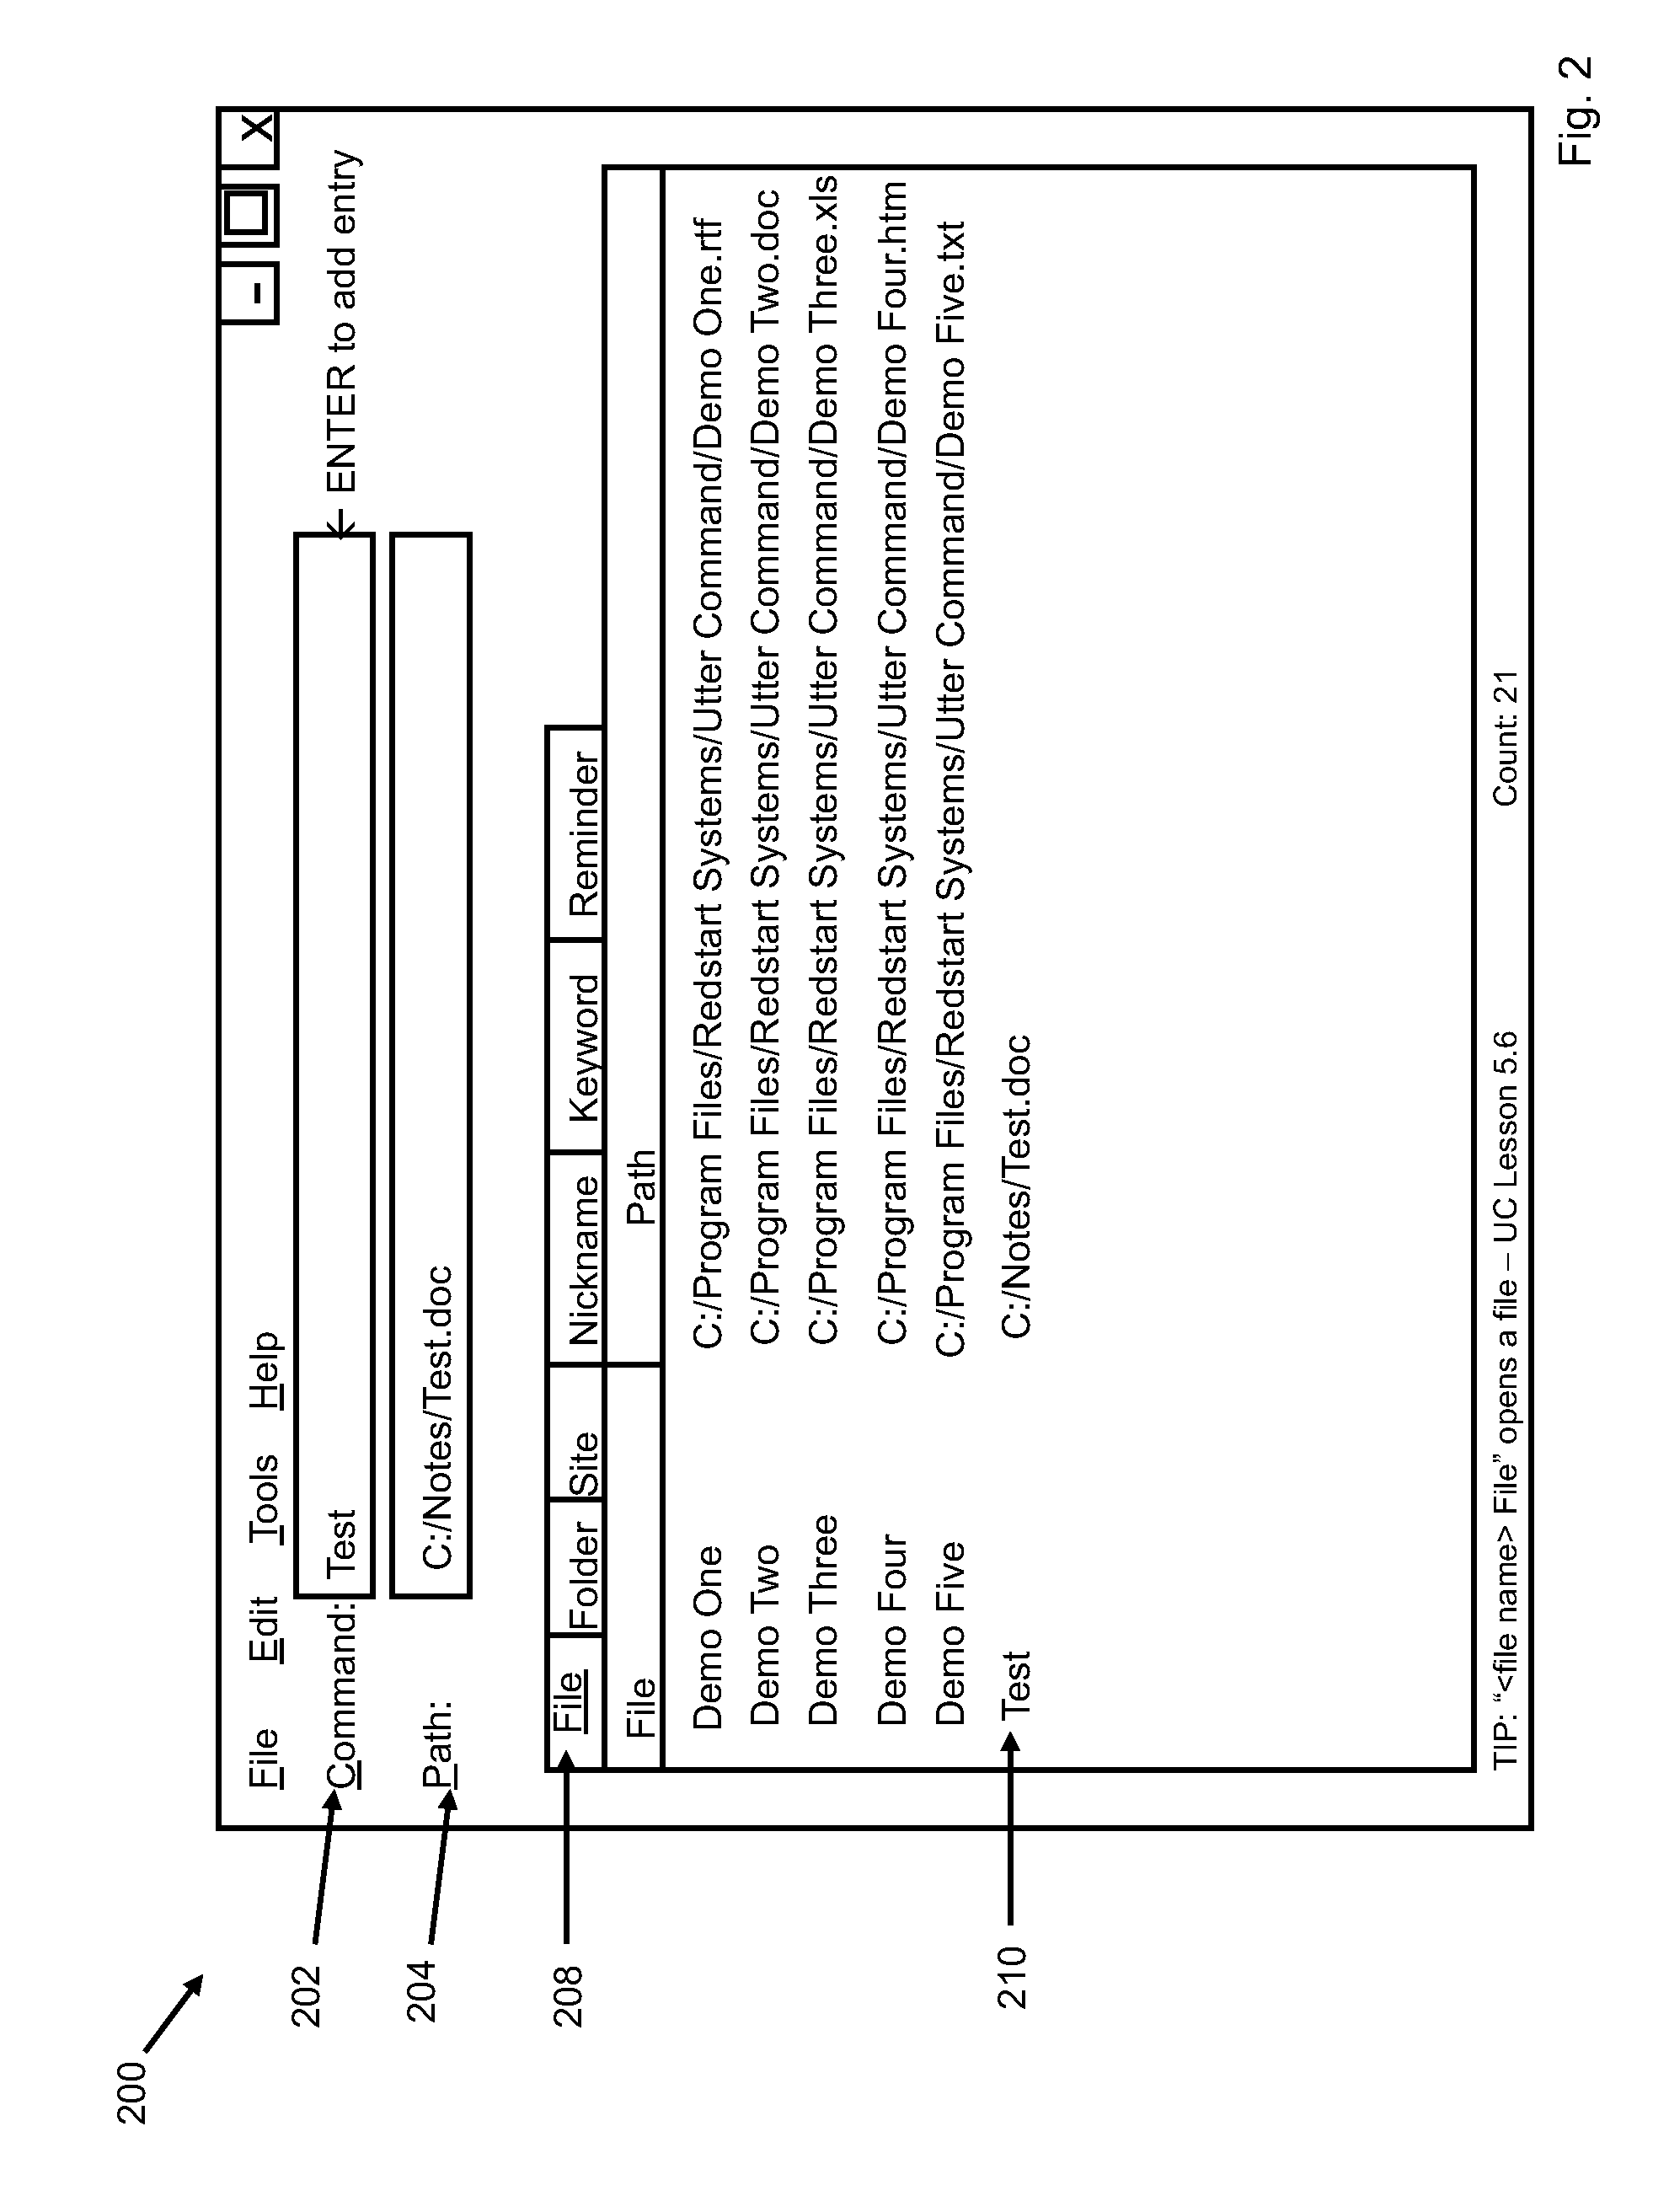 System and method of a list commands utility for a speech recognition command system